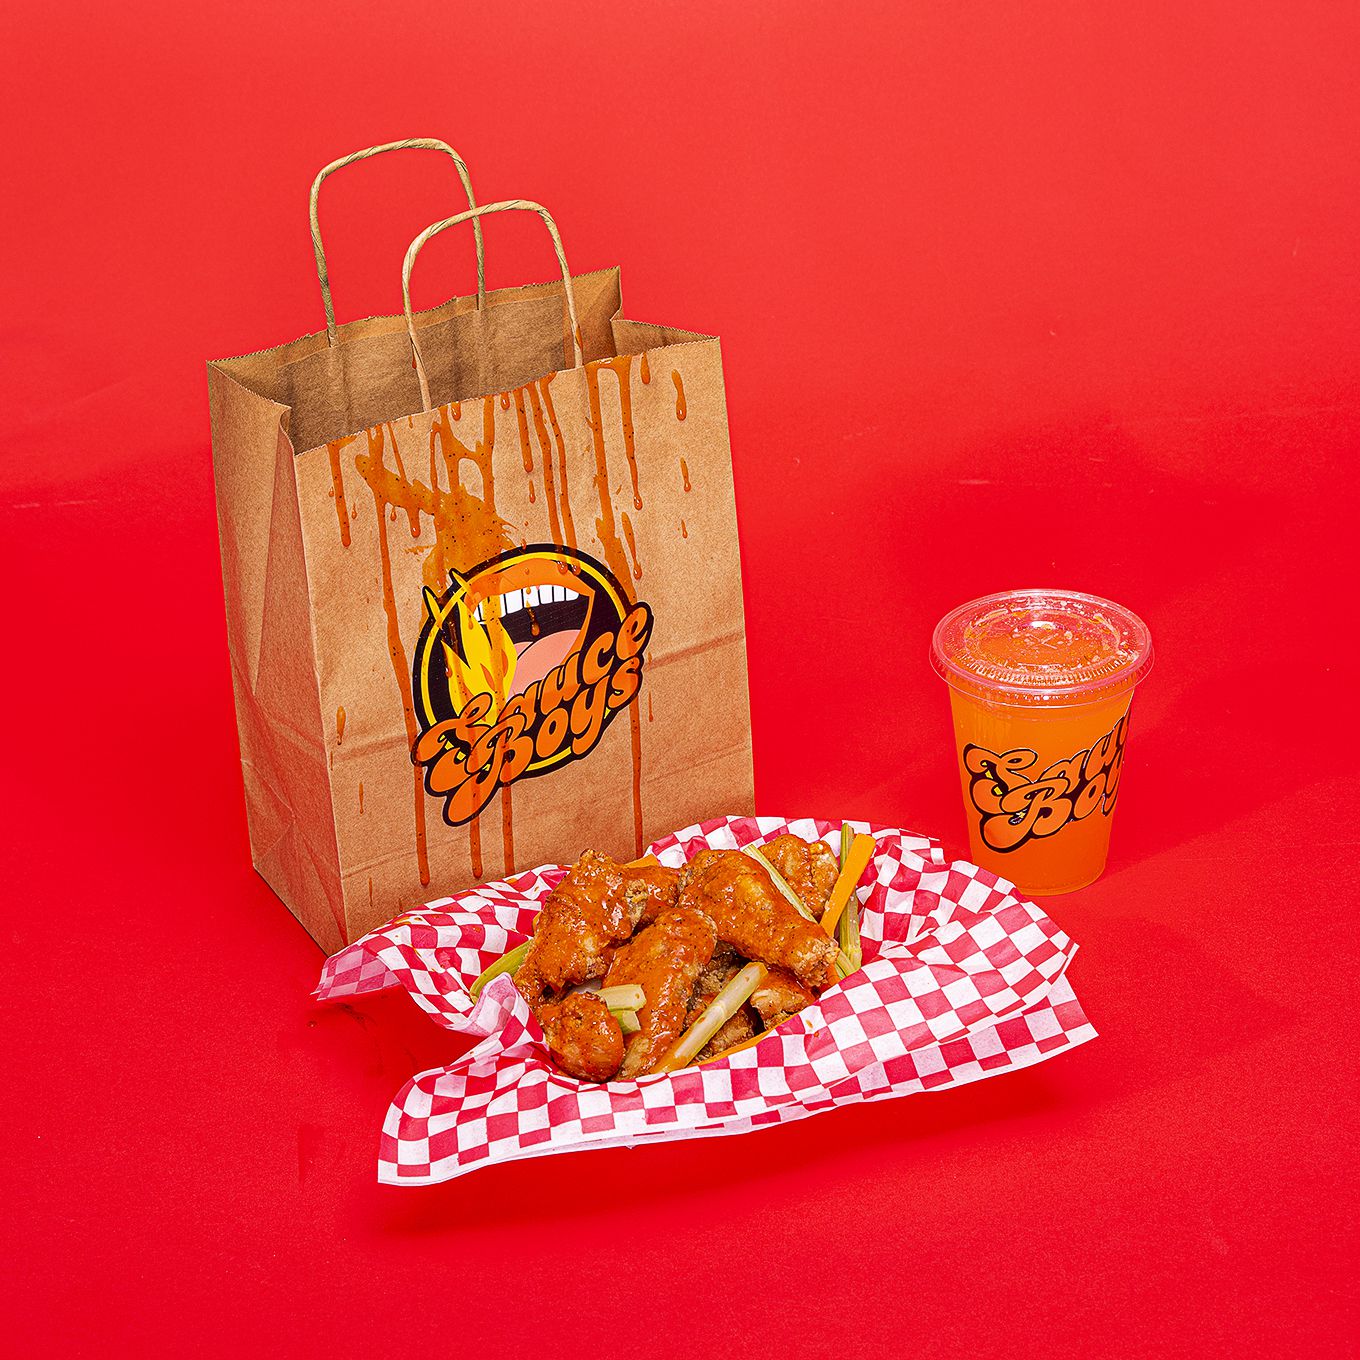 A bag with a sticker for a fake brand called Sauce Boys next to a basket of chicken wings and a clear plastic cup with another sticker for  Sauce Boys on a red backdrop.